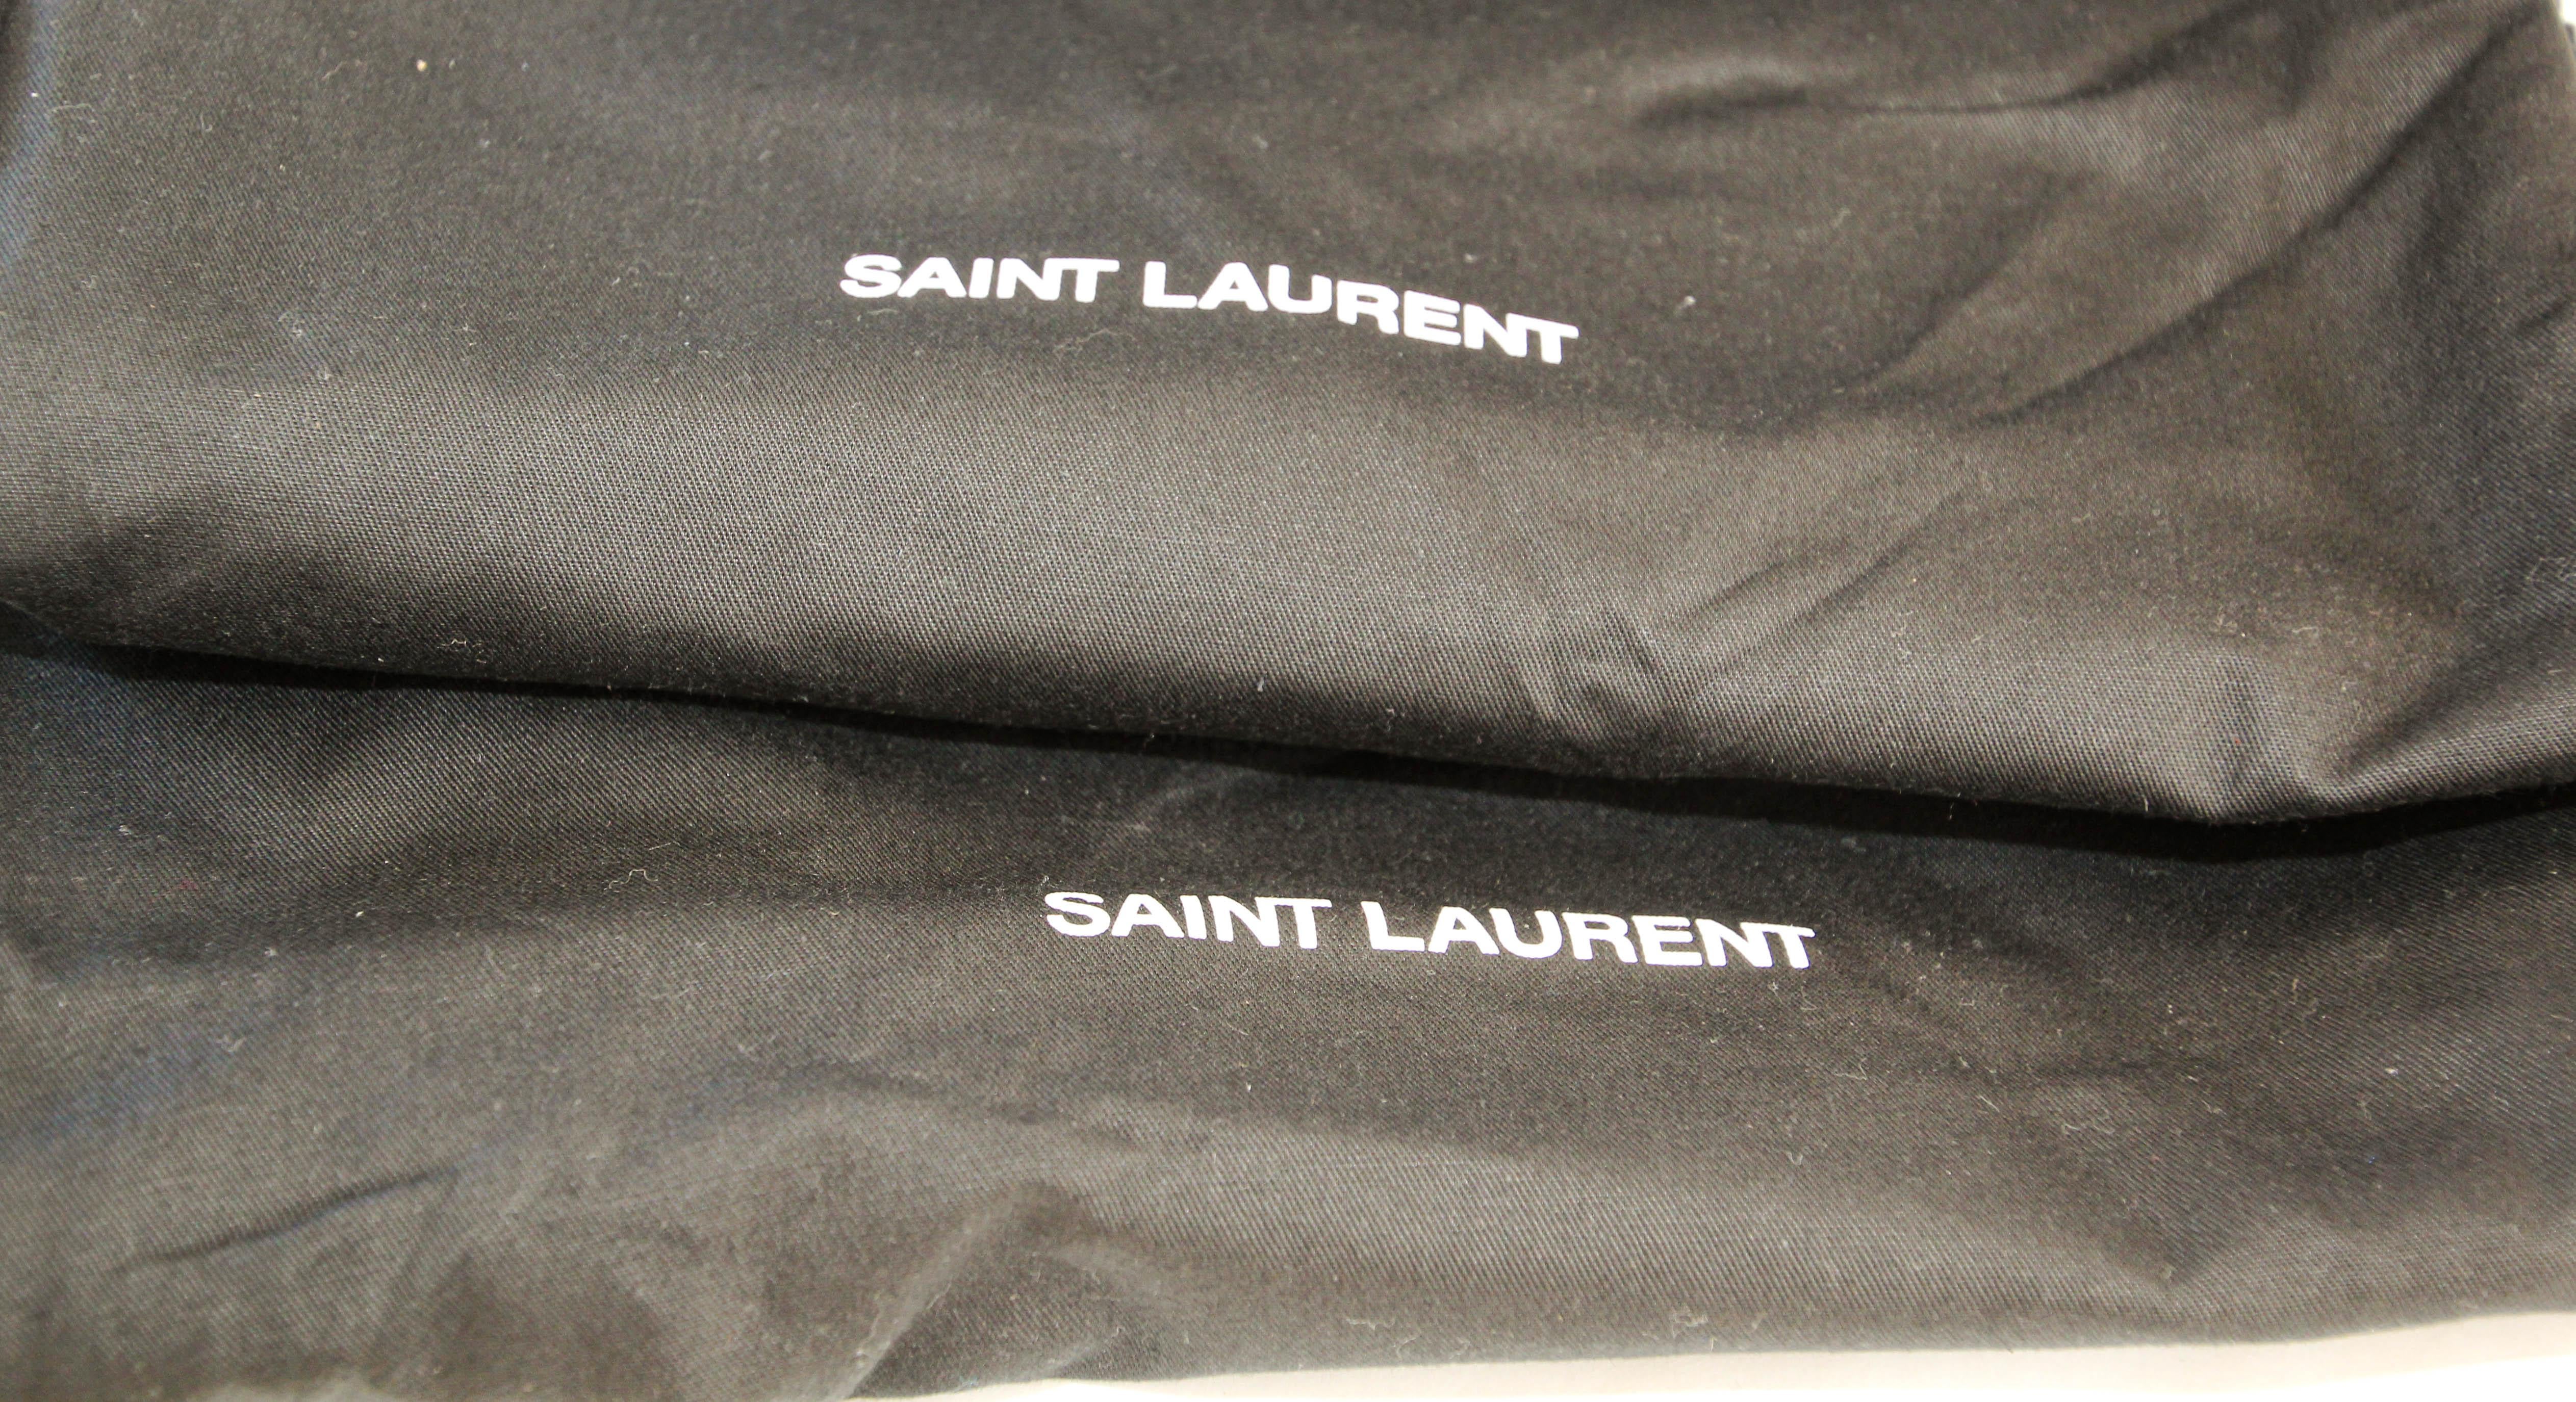 Saint Laurent Sneakers Athletic Shoes In Good Condition In North Hollywood, CA